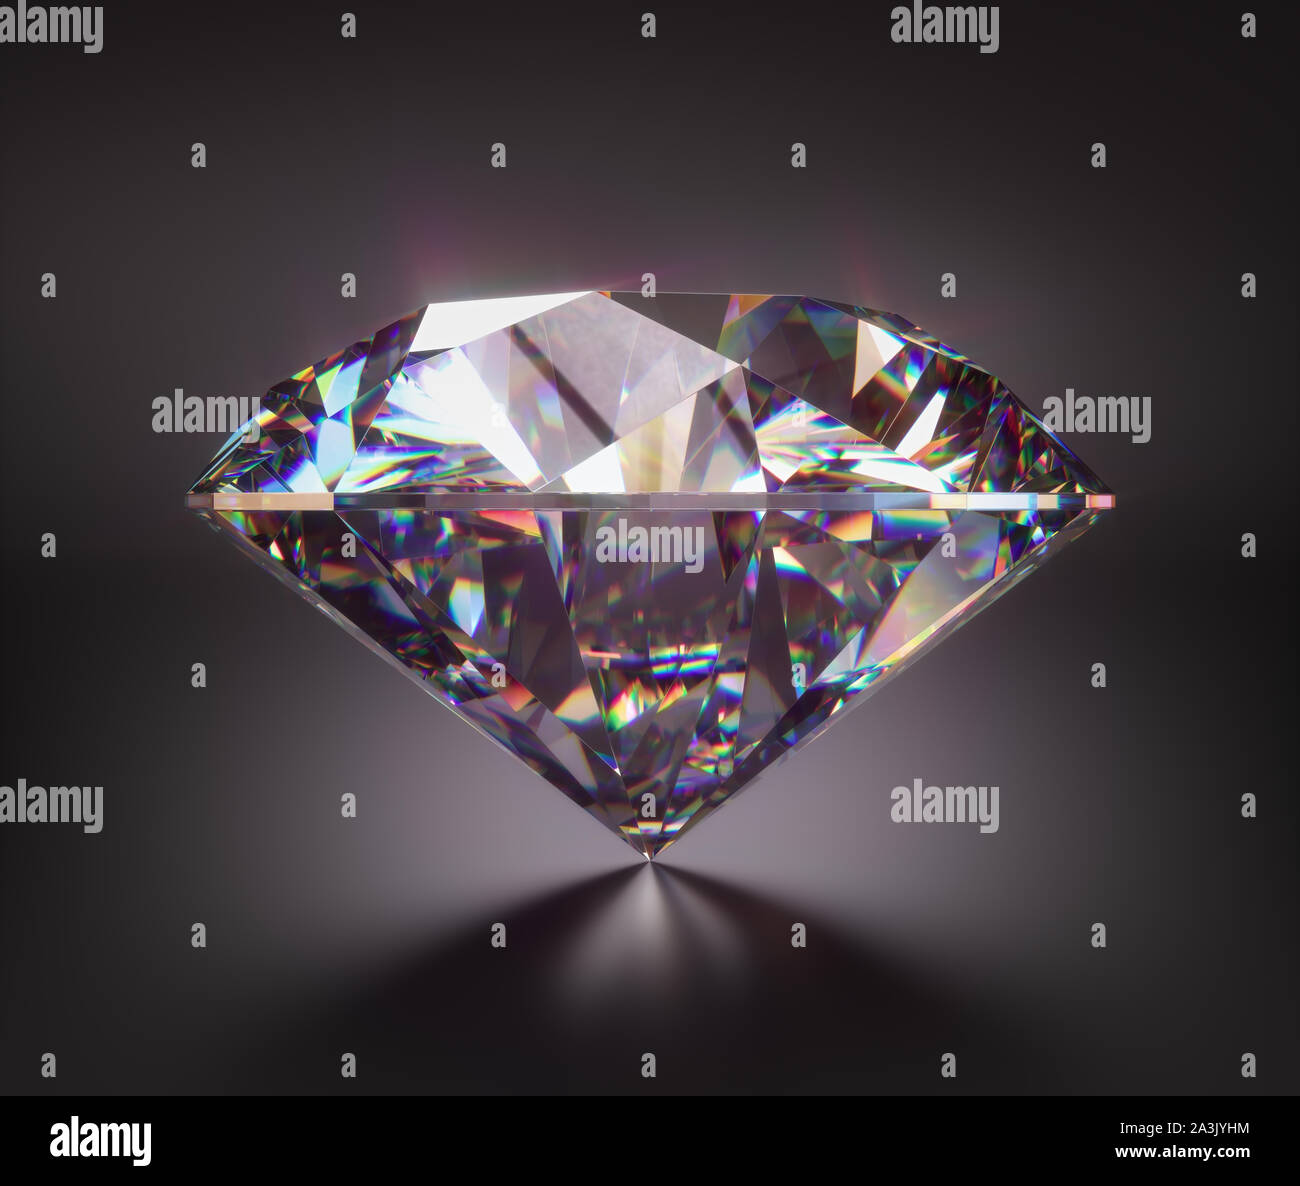 Giant diamond gem with clipping mask. 3D illustration with clipping path included. Stock Photo